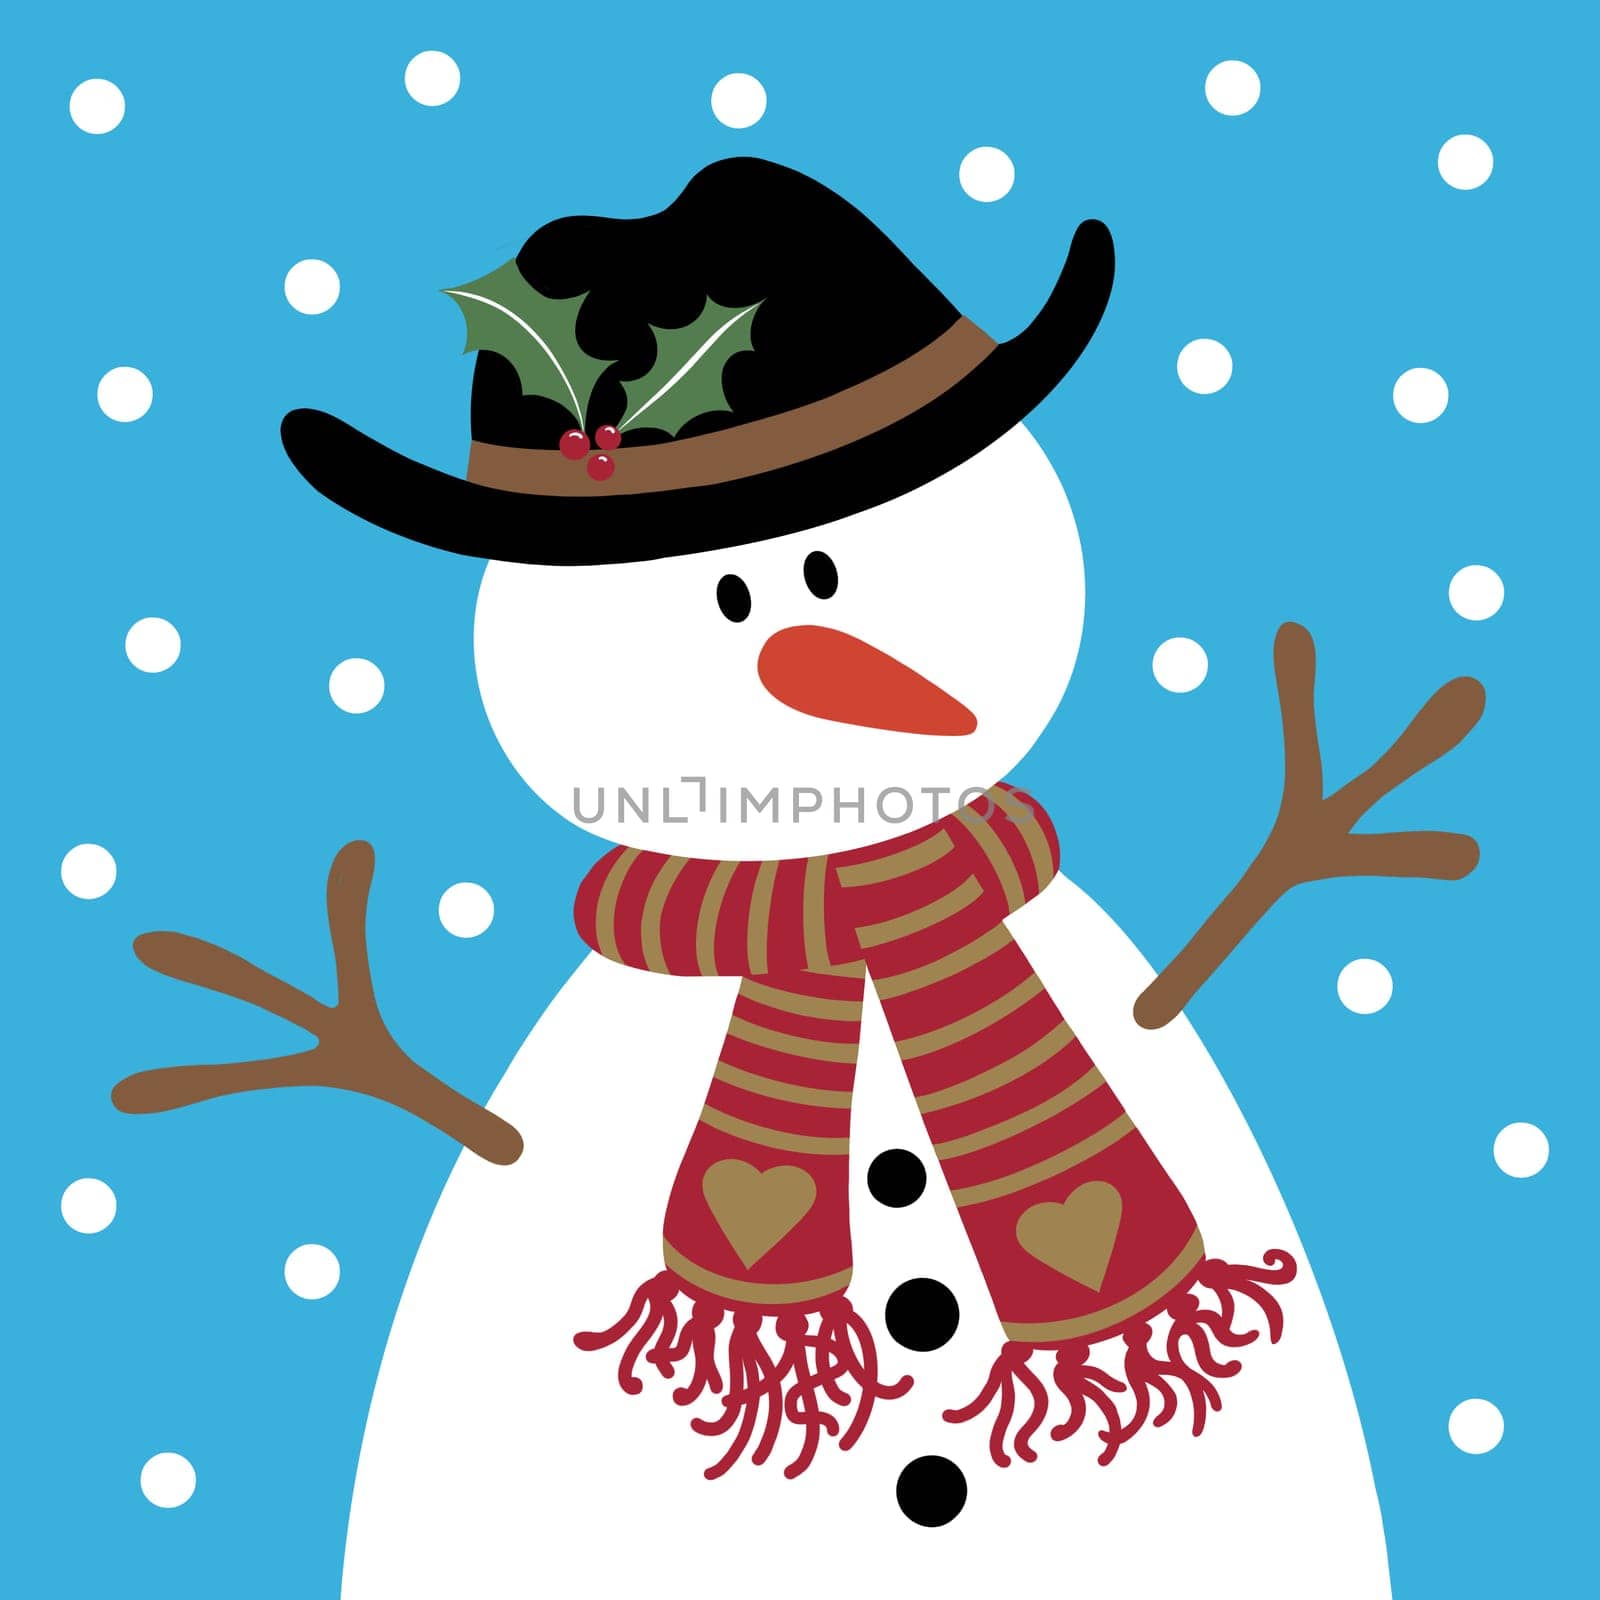 Cartoon snowman illustration on a cold winter day with snow falling.  The snow man is wearing a hat decorated with holly leaves and a striped scarf with hearts motifs and tassels. He has a the traditional carrot for his nose and twigs as arms. Fun in the snow at Christmas.